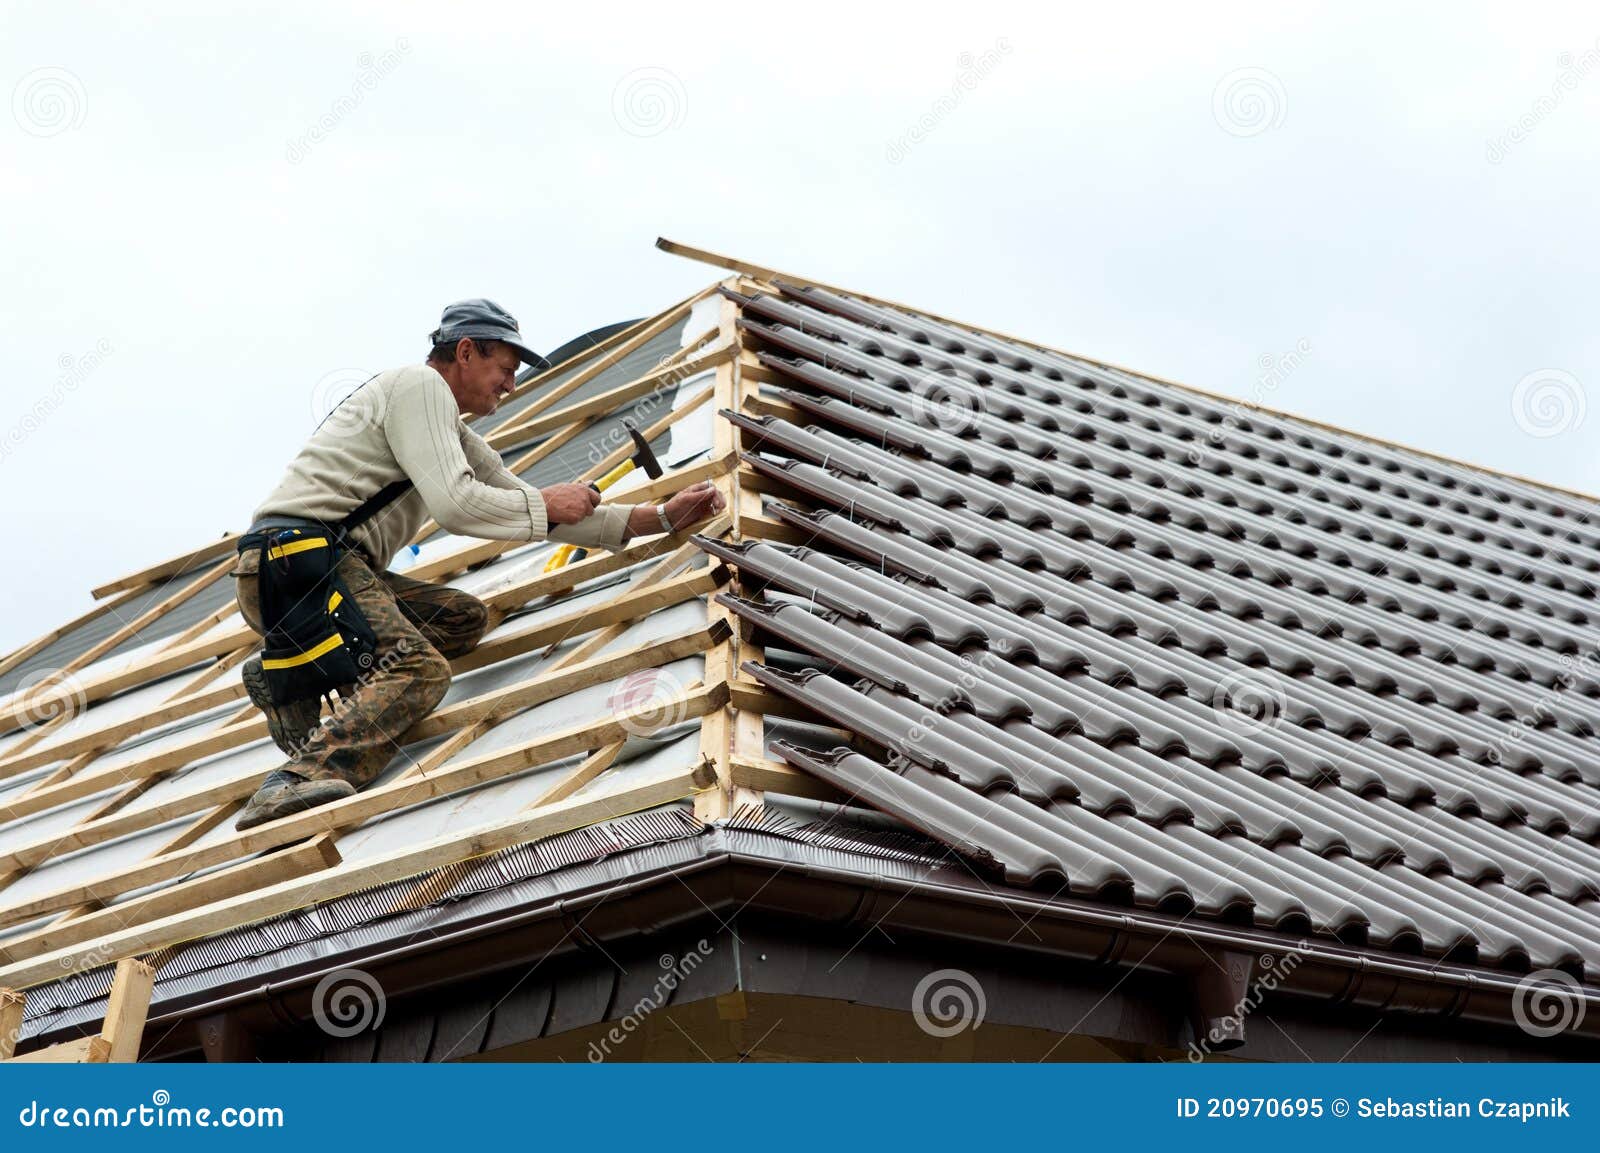 roofer laying tiles